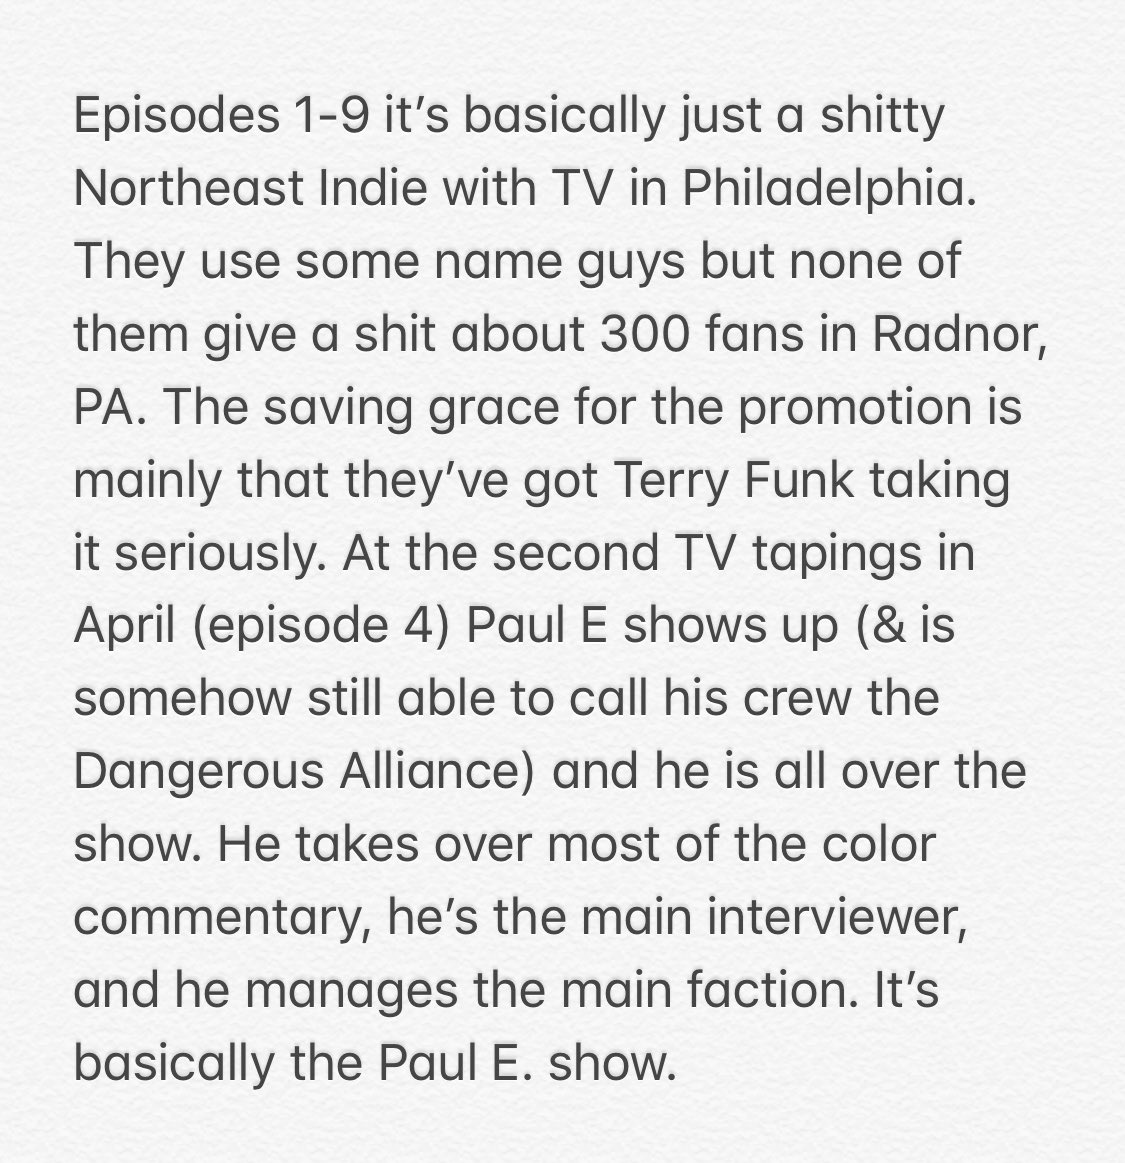 Okay so I’m about to start episode 16. Here is kind of a state of ECW address up to this point, if anyone is actually reading this and wants a feel for what is happening at this point where they’ve held 3 sets of tapings and one super show, but must keep airing stuff out of order